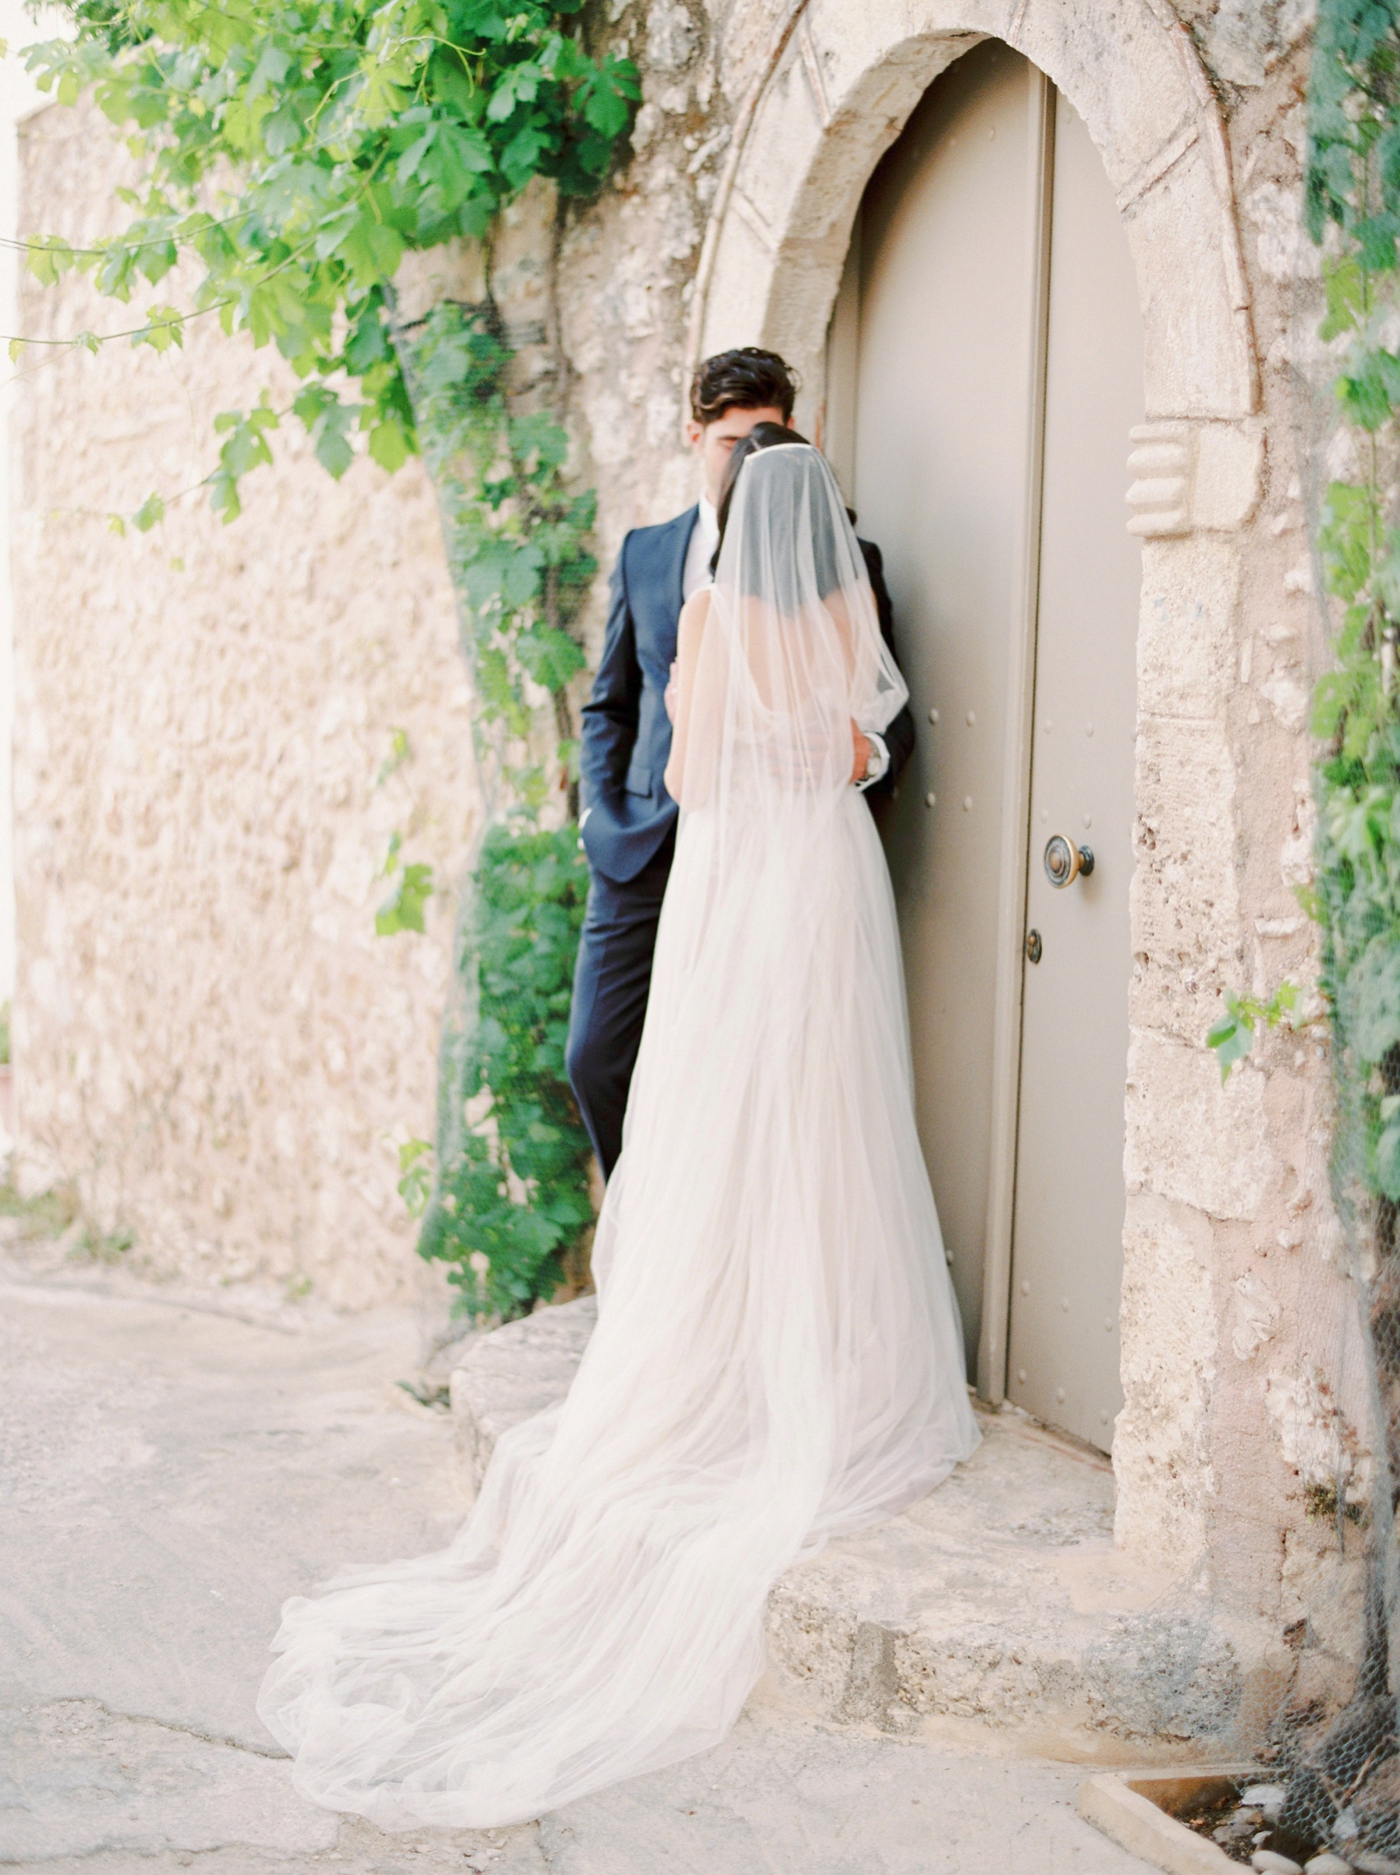 spetses greece destination wedding photographers | intimate wedding in a private villa in greece | Magnolia rouge | film photography workshop phos | Justine Milton Photography